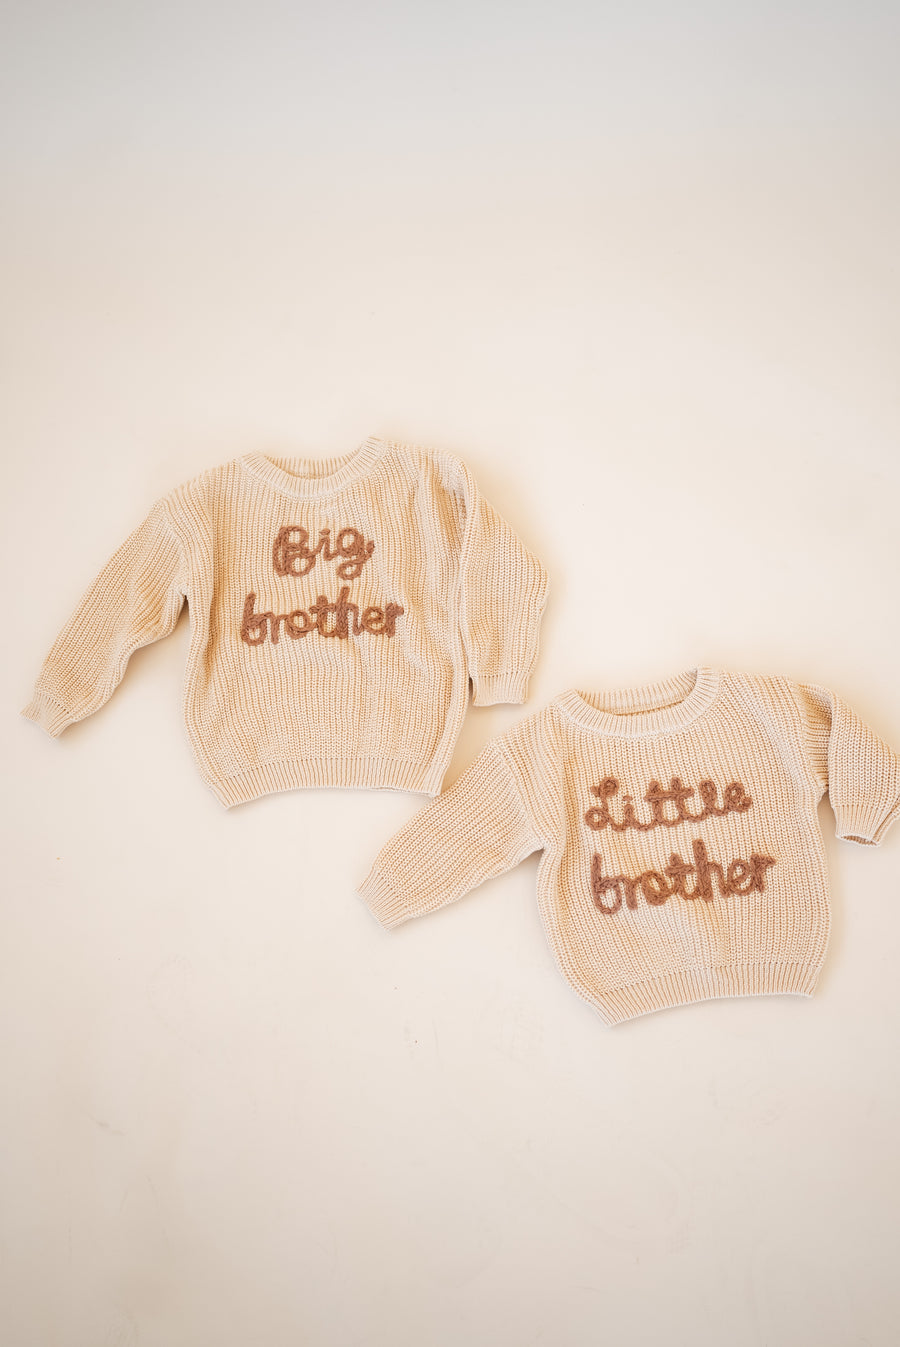 Big Brother Knit Sweater